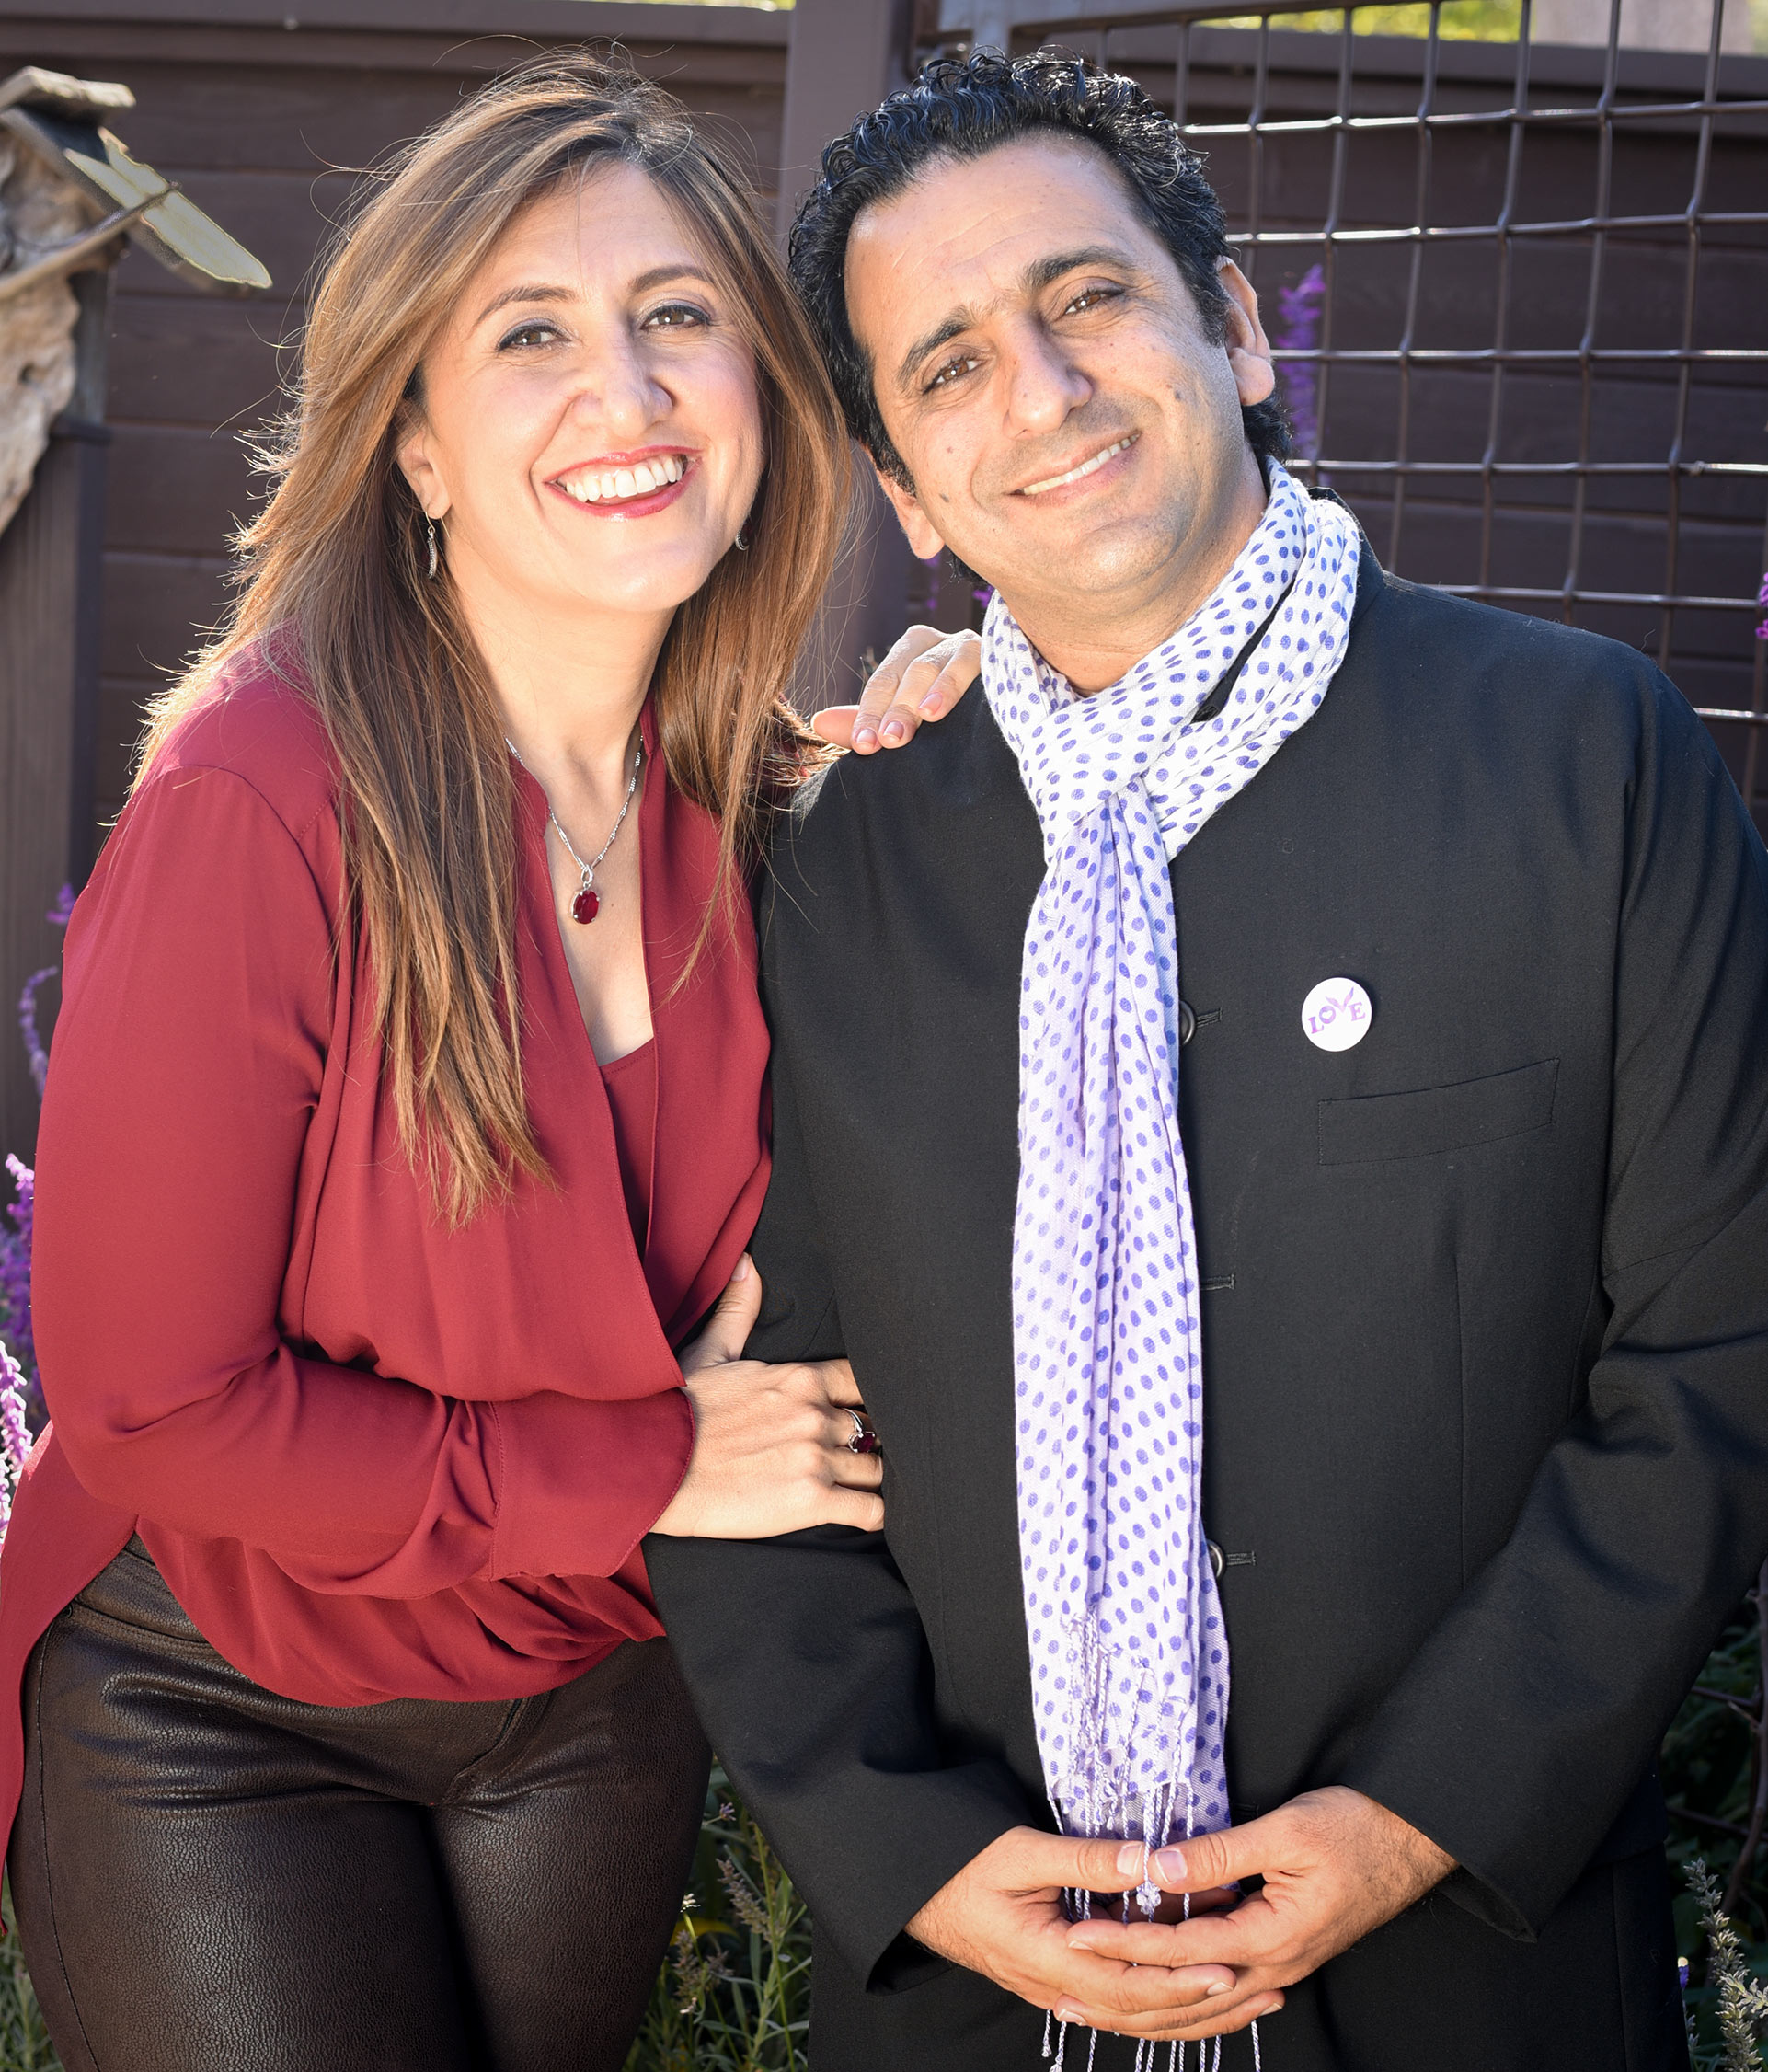 Founded by two doctors, Dr. Habib Sadeghi and Dr. Sherry Sami, the Love Button Global Movement fosters loving acts of kindness